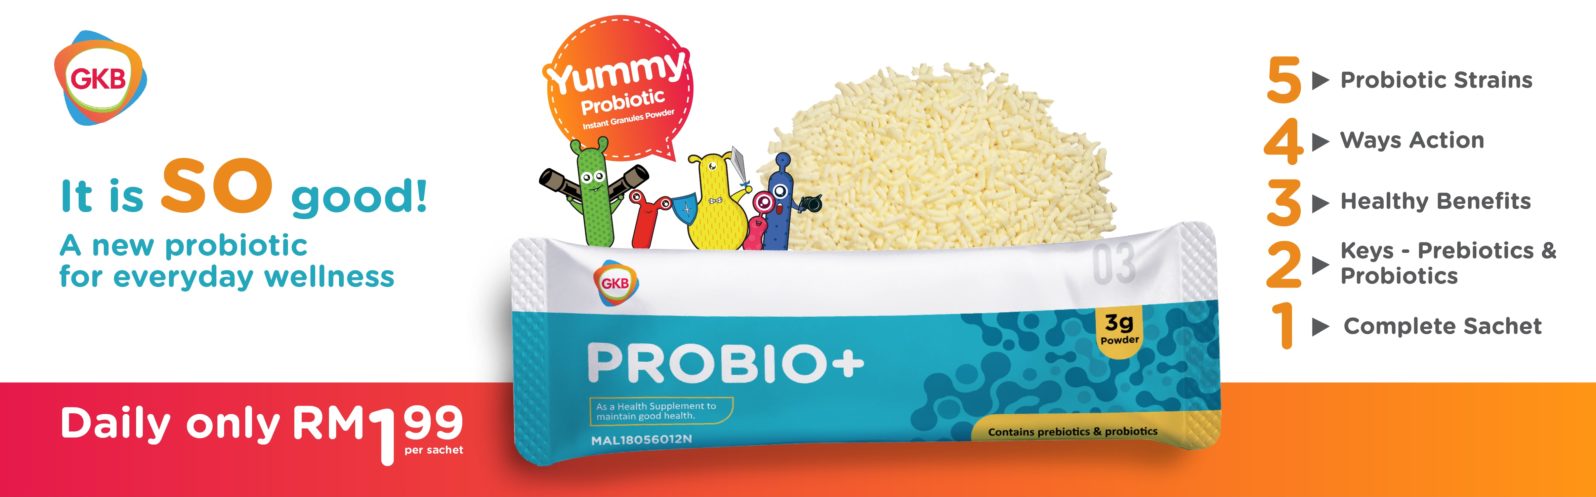 GKB Probio+ is probiotics for whole family, good digestion and stronger immunity.